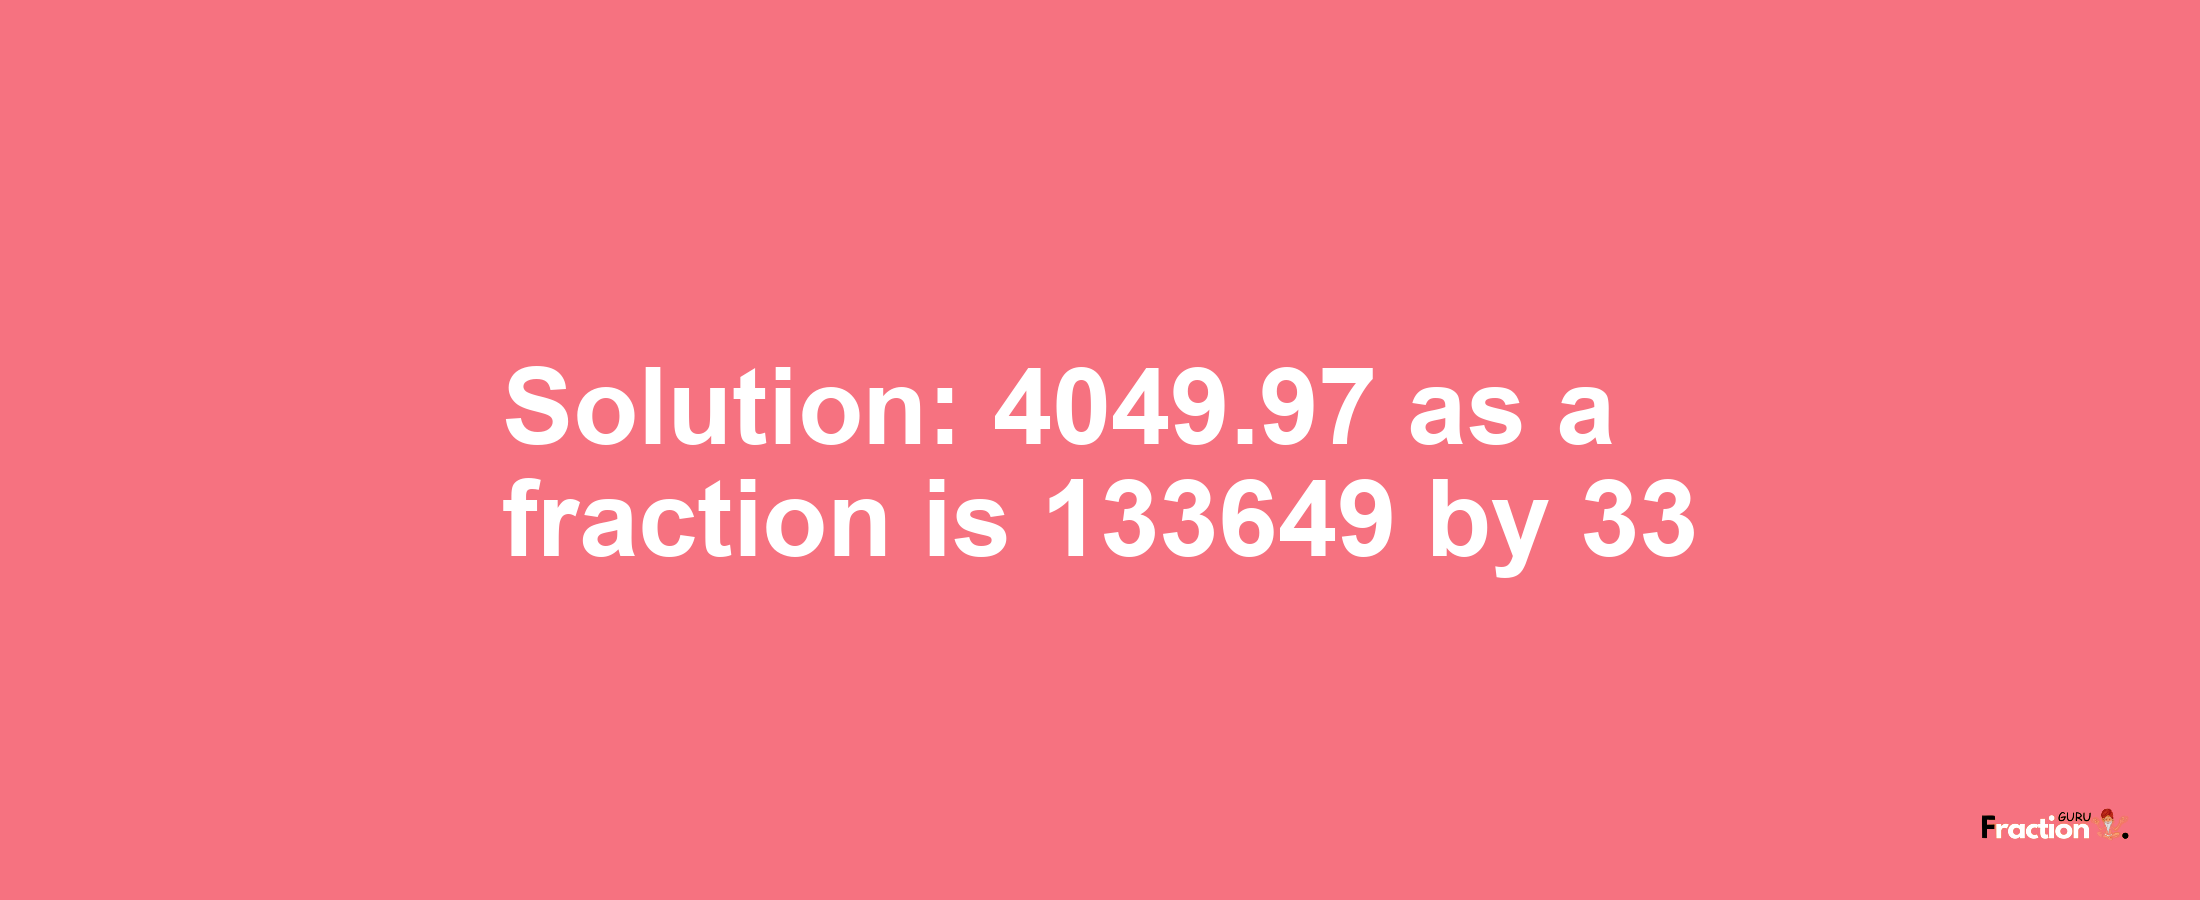 Solution:4049.97 as a fraction is 133649/33